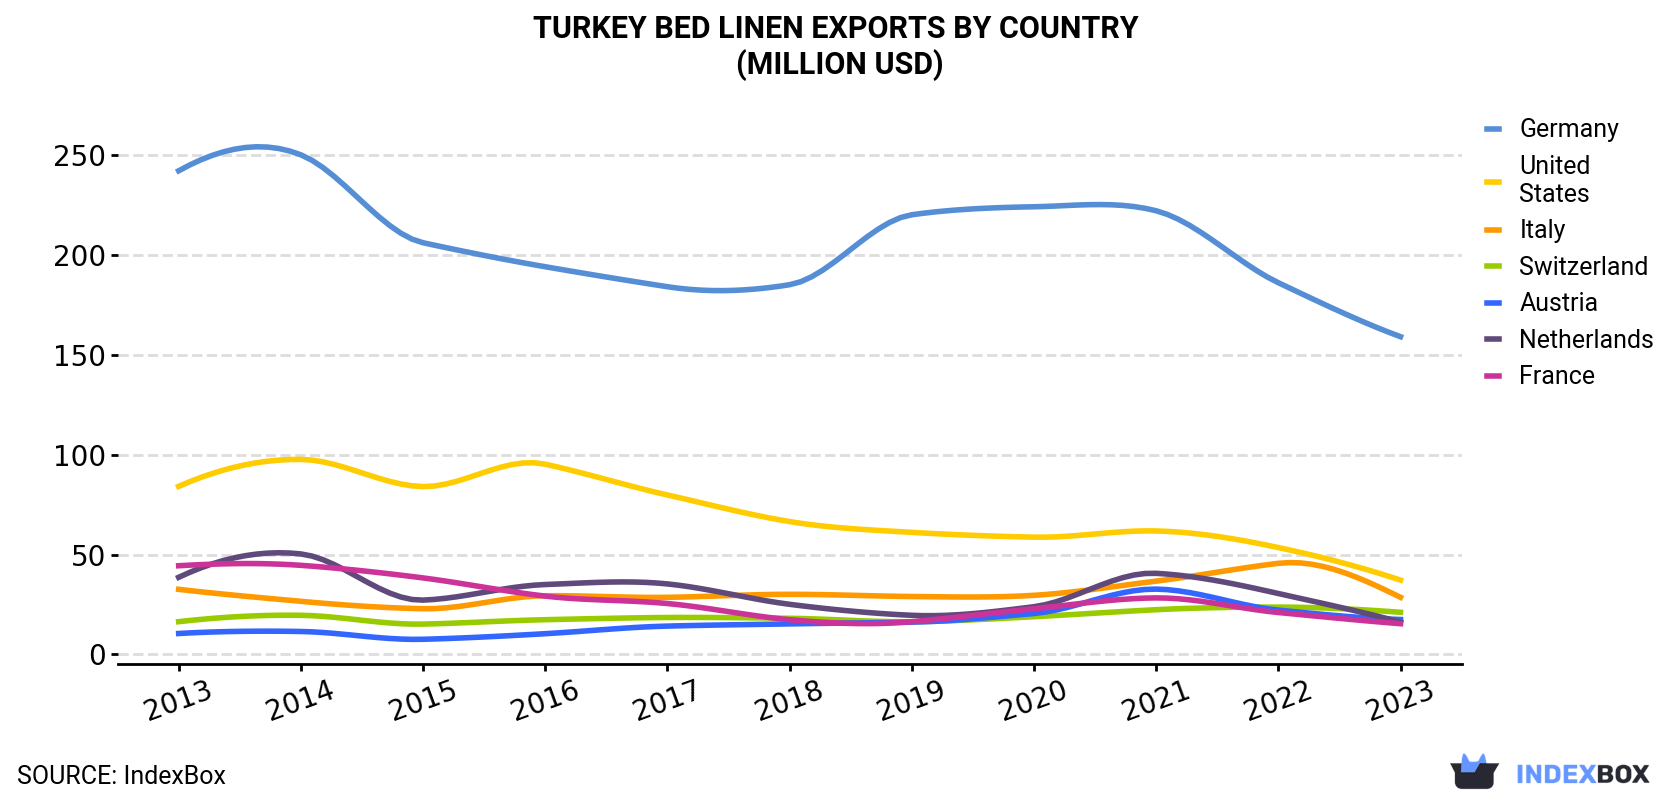 Turkey Bed Linen Exports By Country (Million USD)